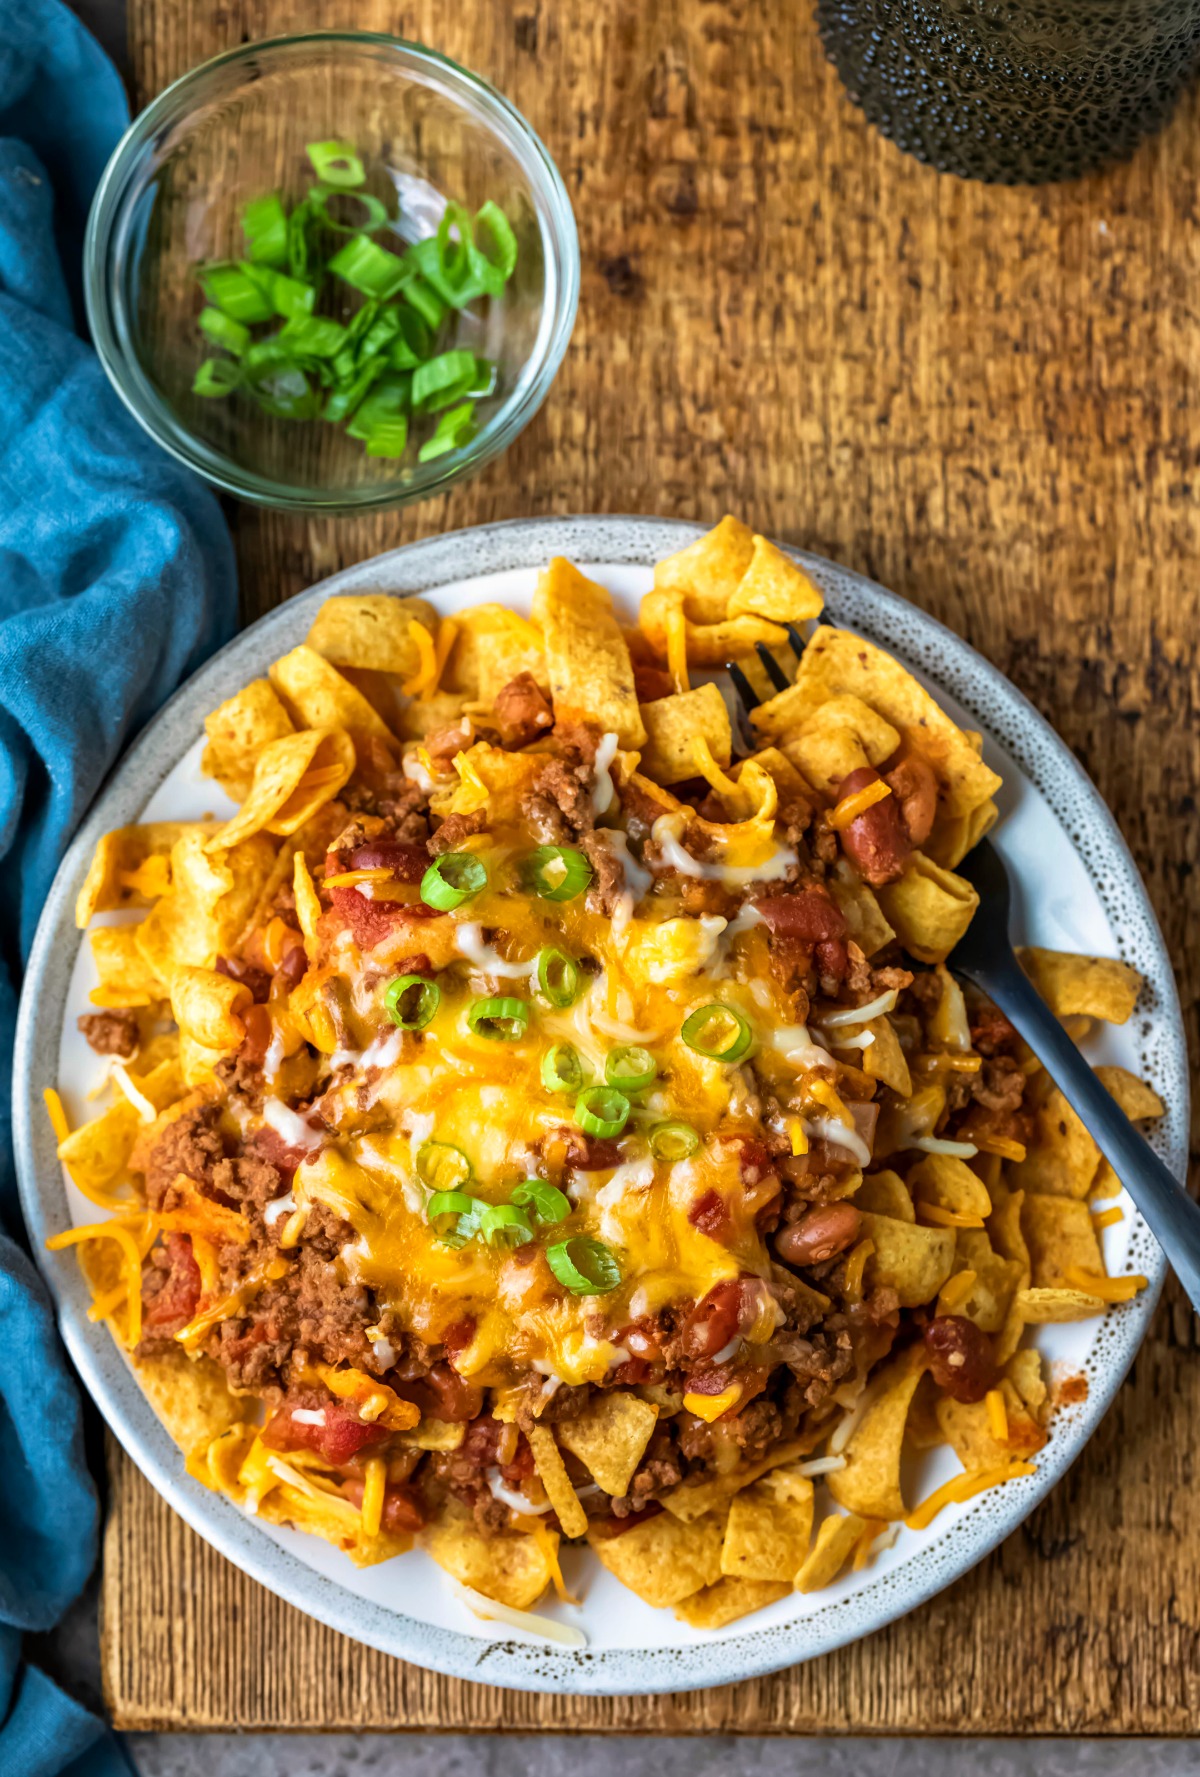 Overhead photo of a plate of chili frito pie on a wooden cutting board.